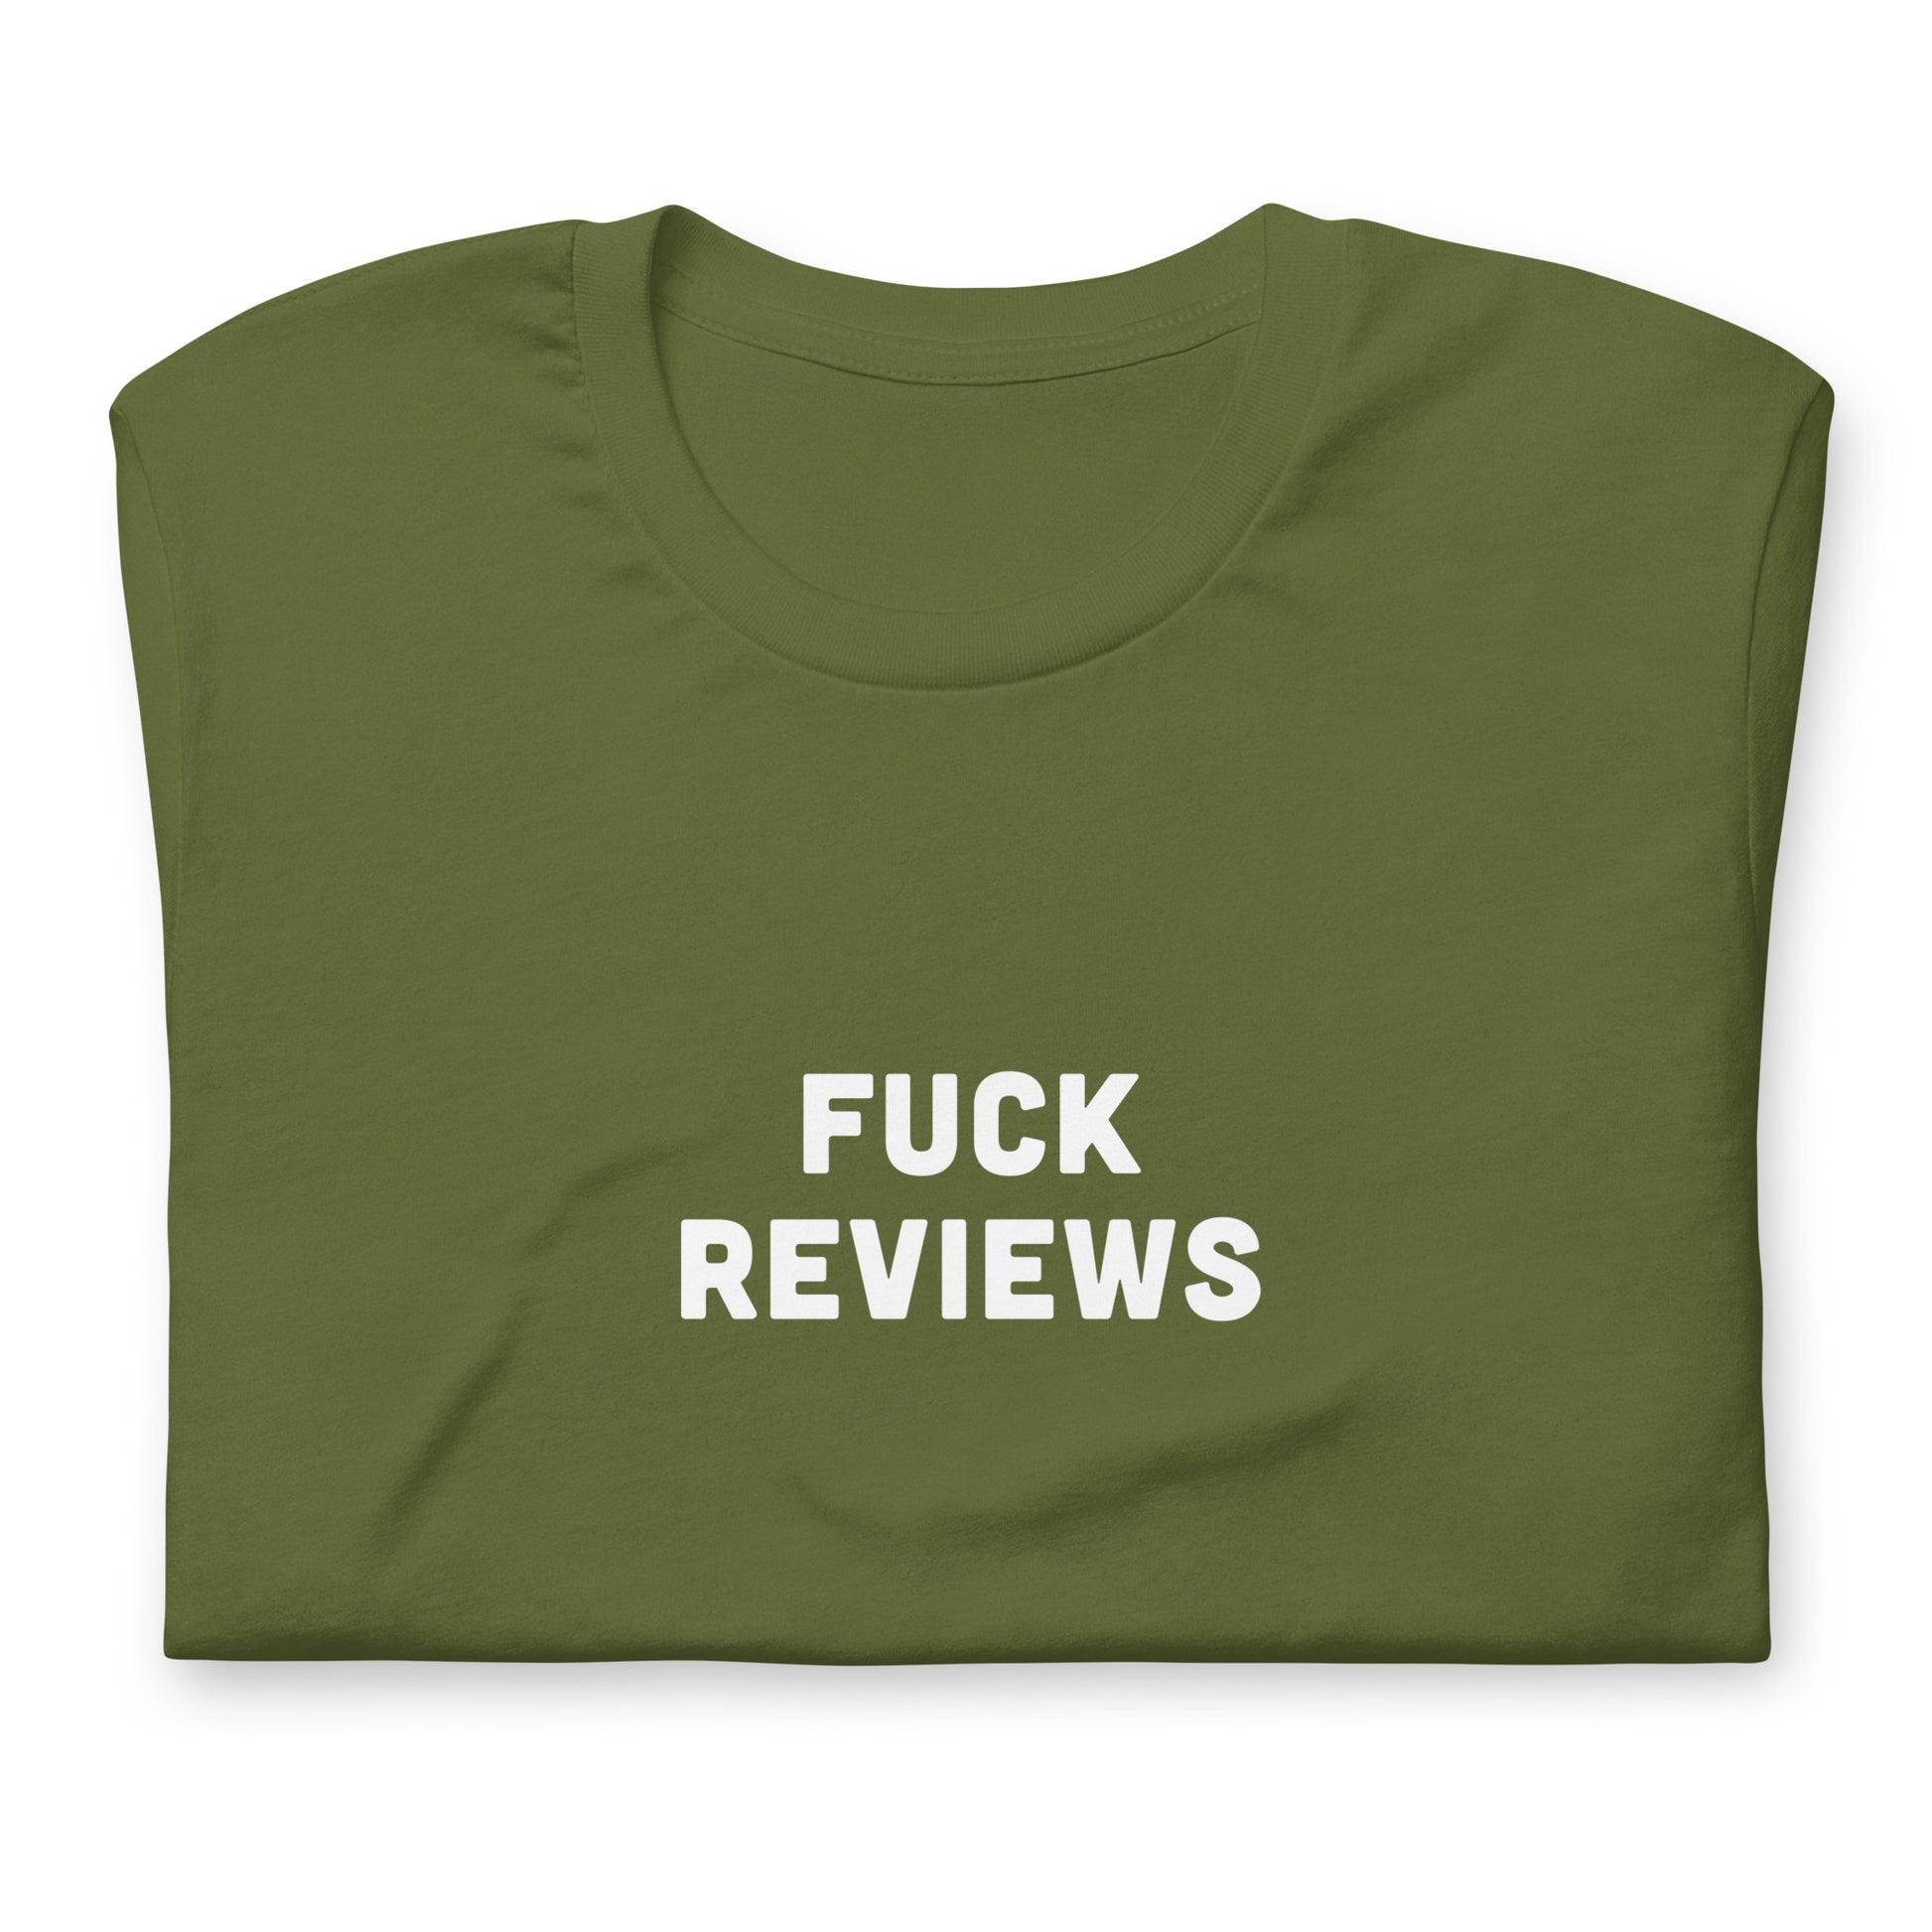 Fuck Reviews T-Shirt Size S Color Navy